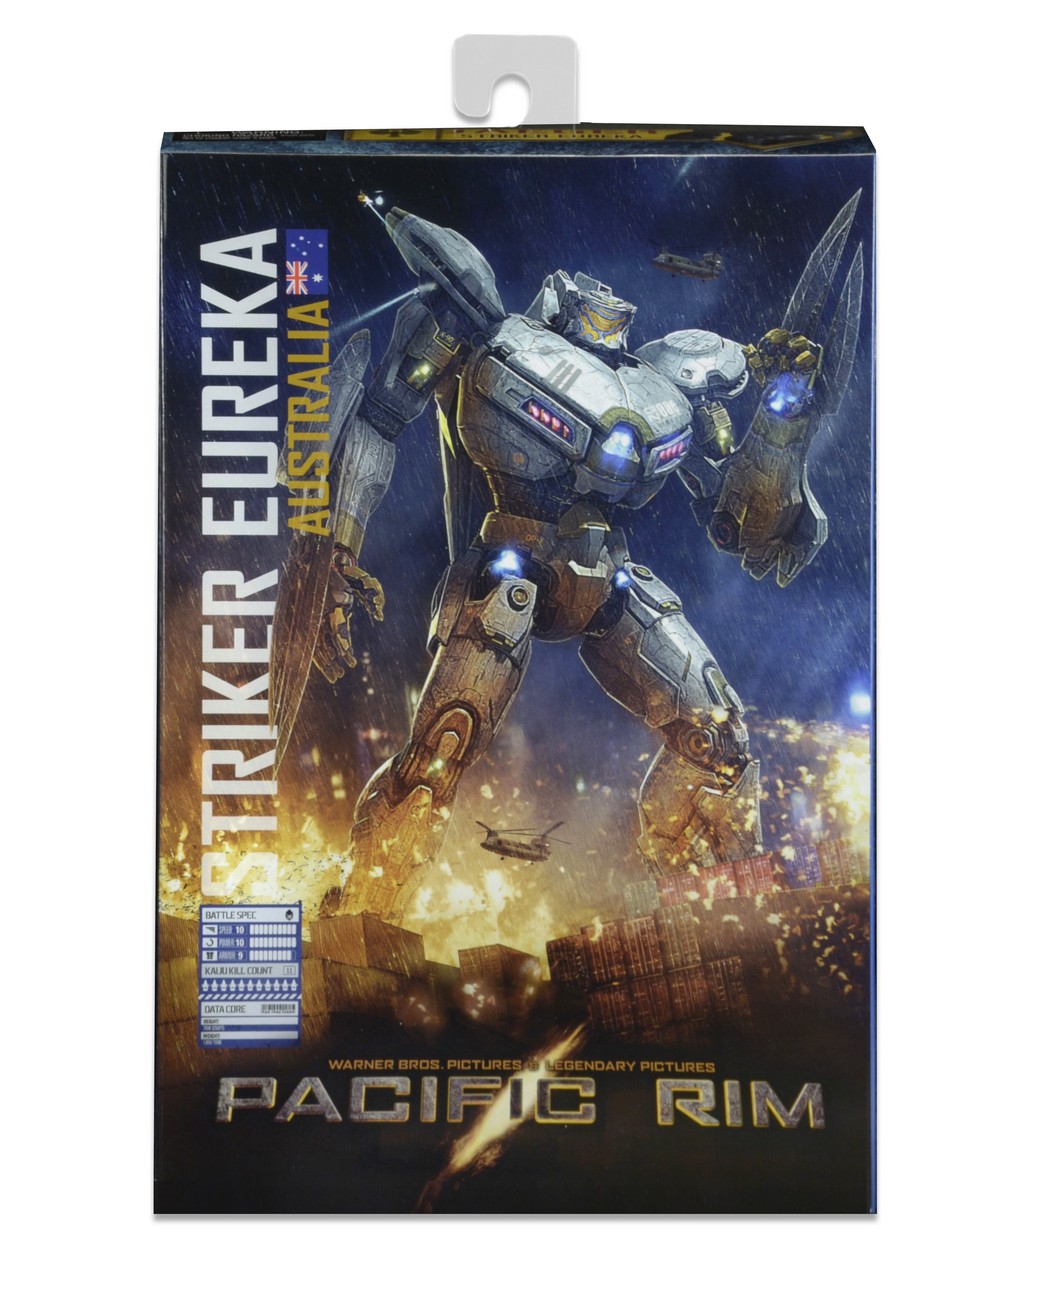 Shipping Soon: 1/4 Scale Predator with LED Lights, Pacific Rim Ultimate ...